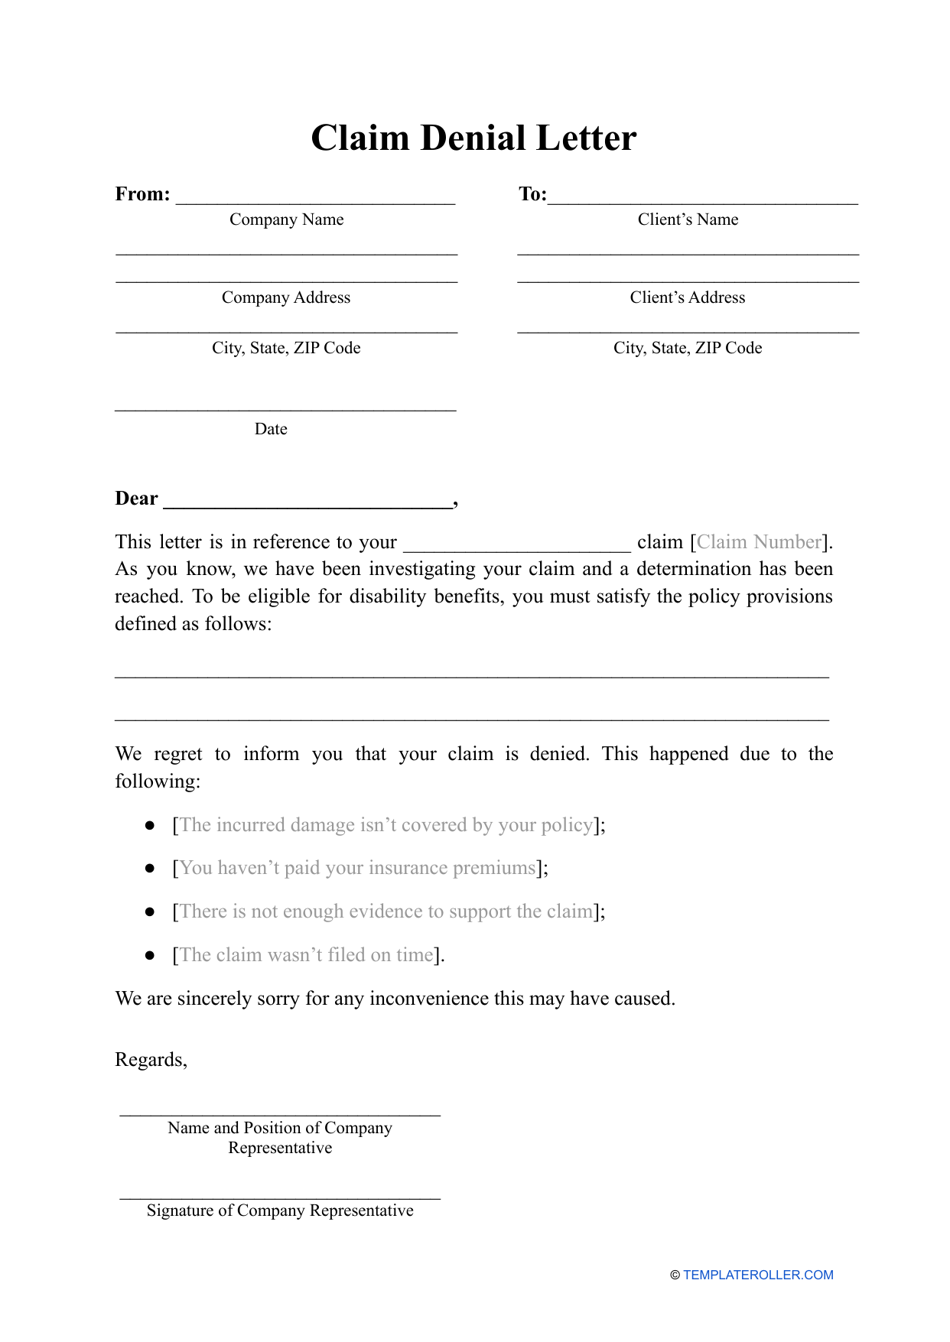 Claim Denial Letter Template Download Printable Pdf | Templateroller